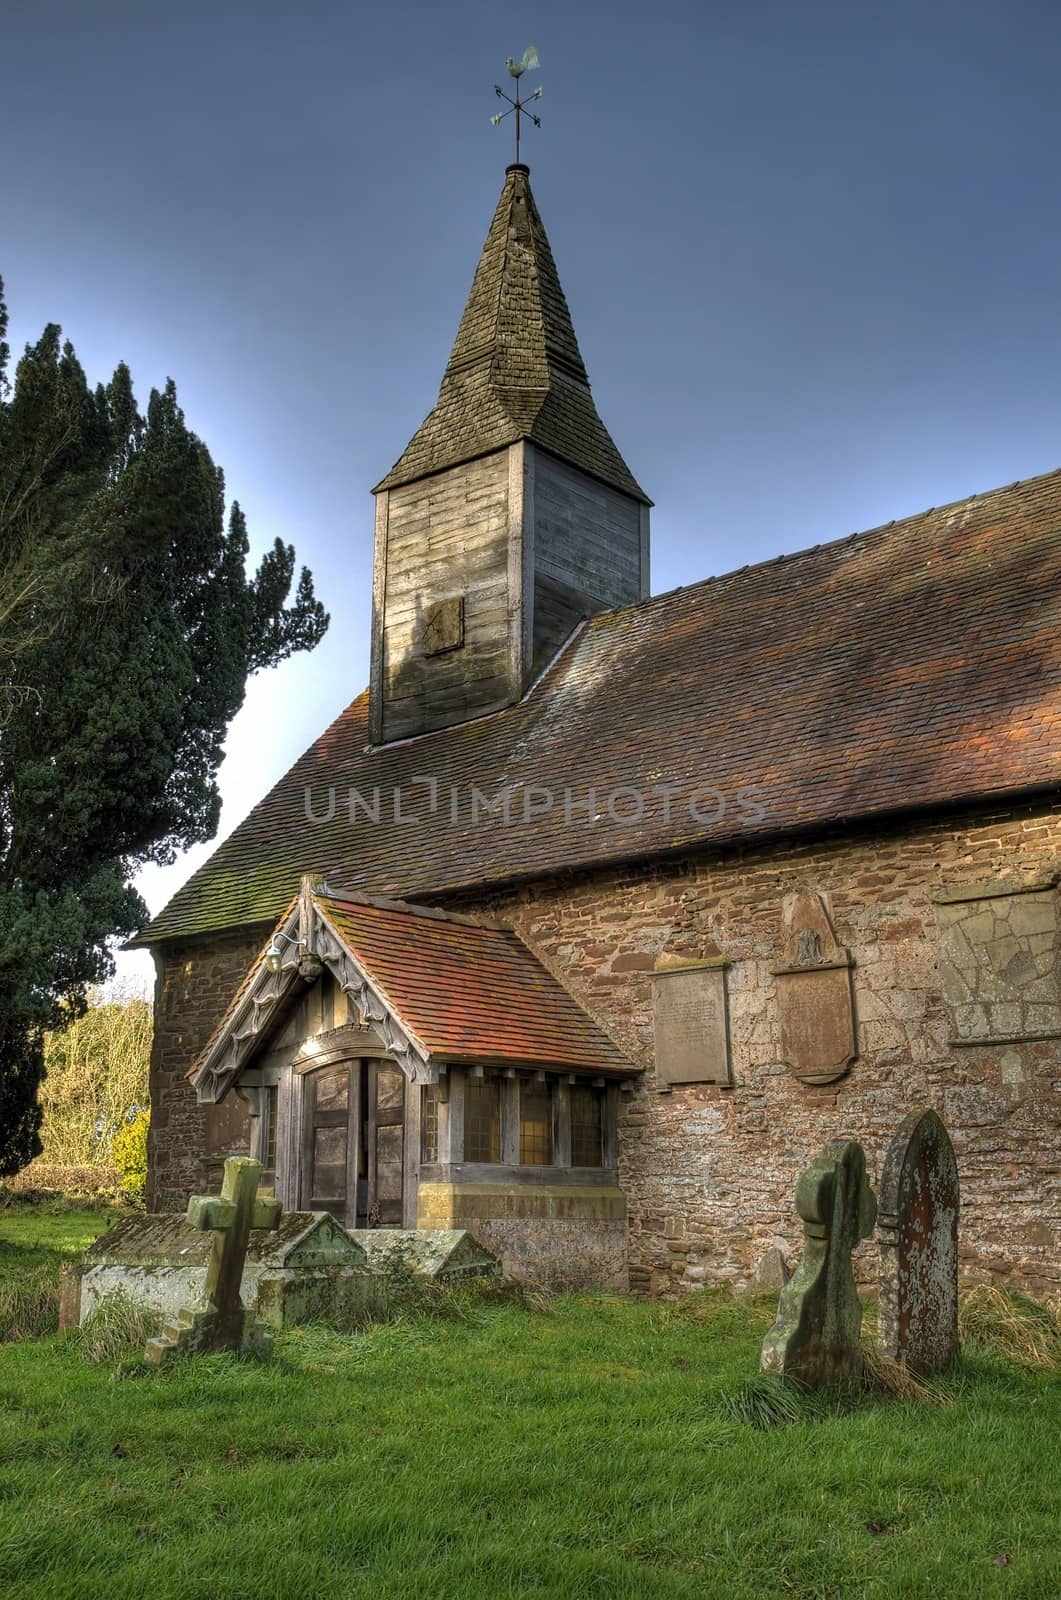 All Saints Church with its small wooden bell tower, Hanley William, Worcestershire, England.